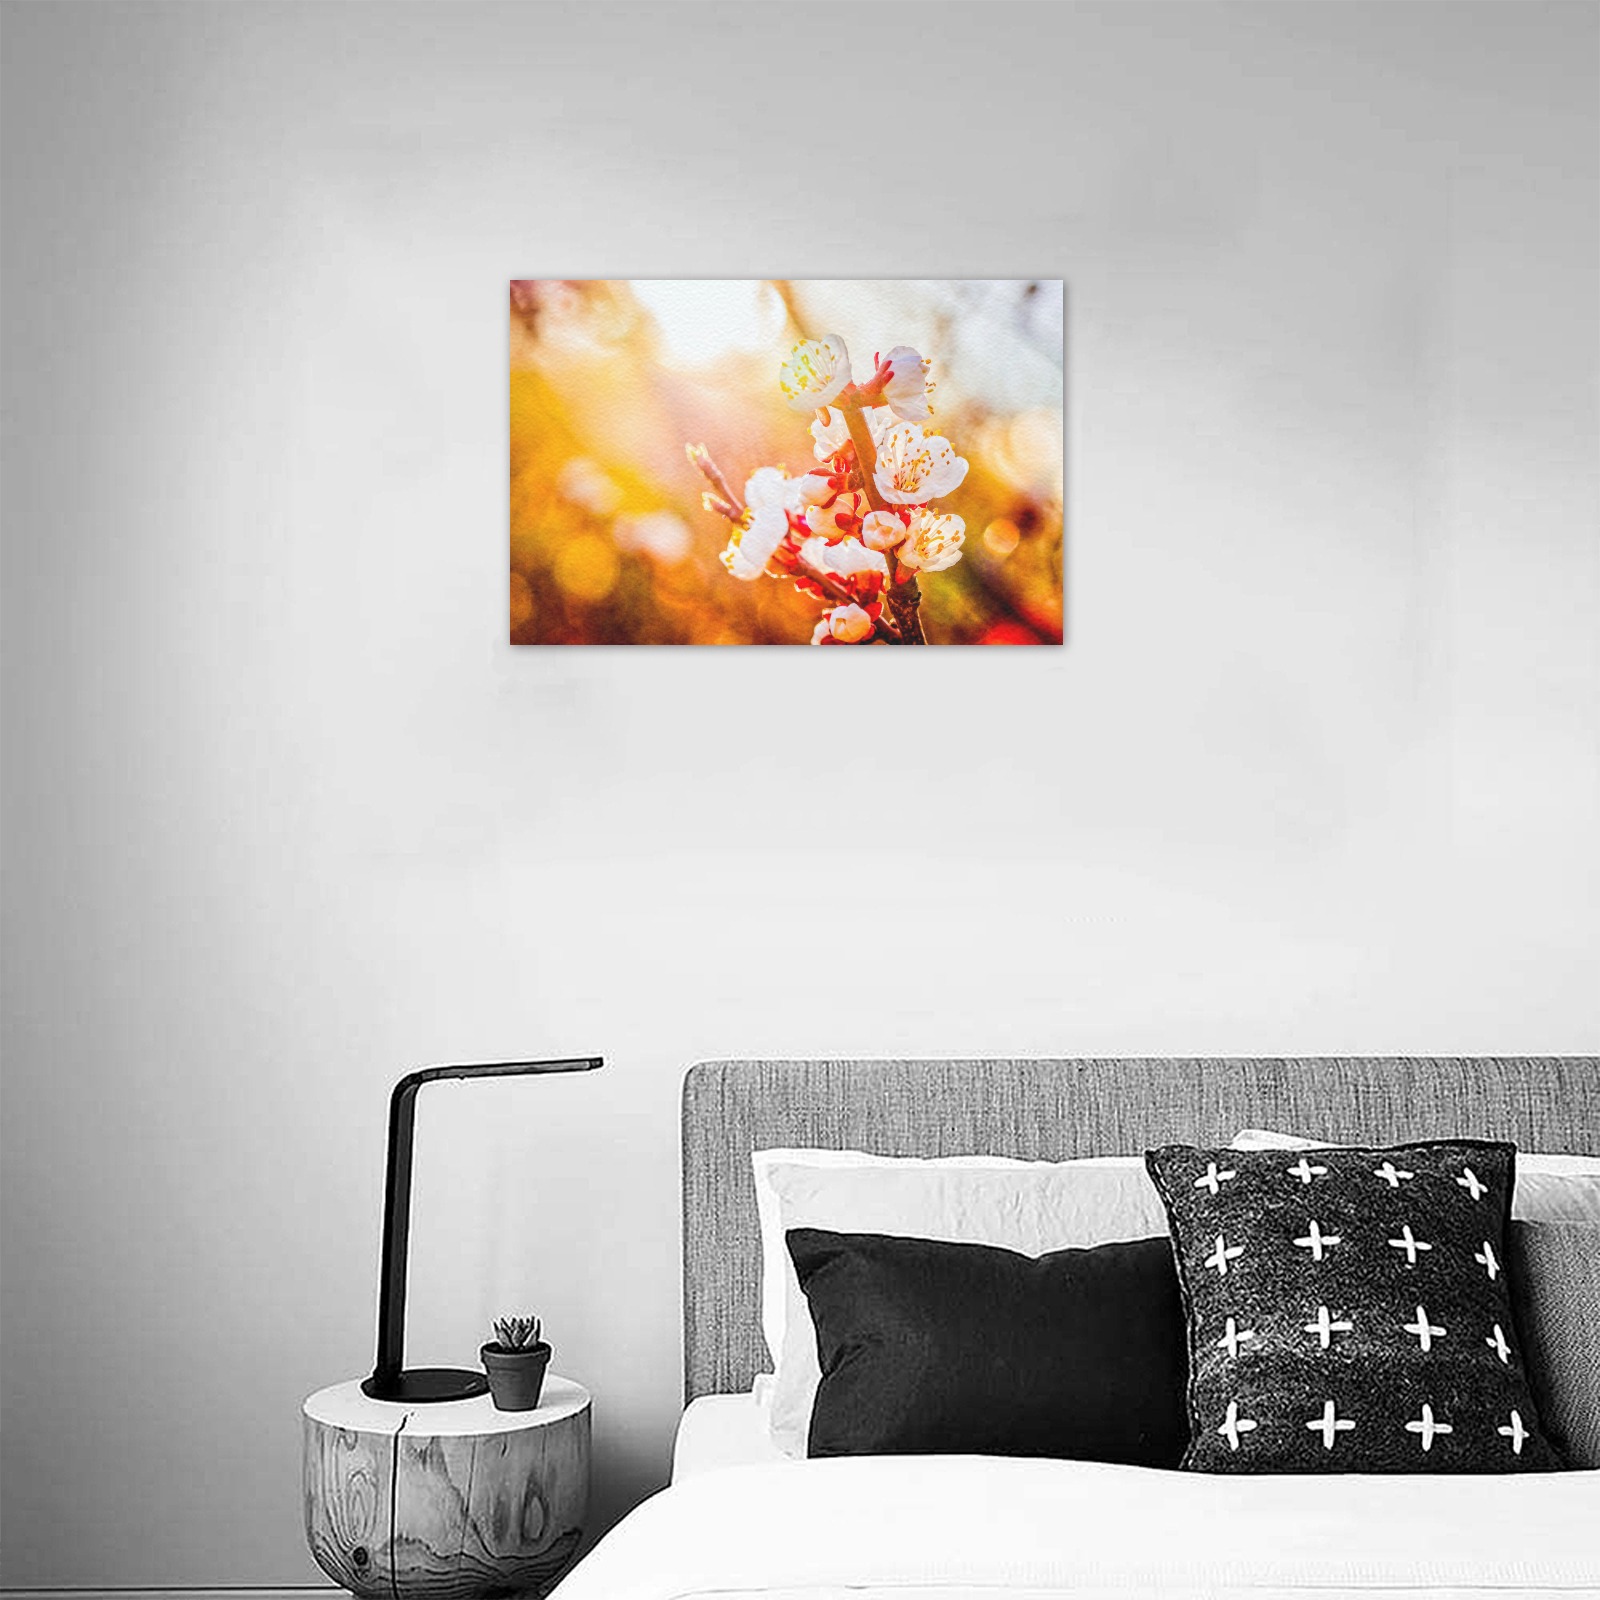 Japanese apricot flowers in the light of sunset. Upgraded Canvas Print 18"x12"